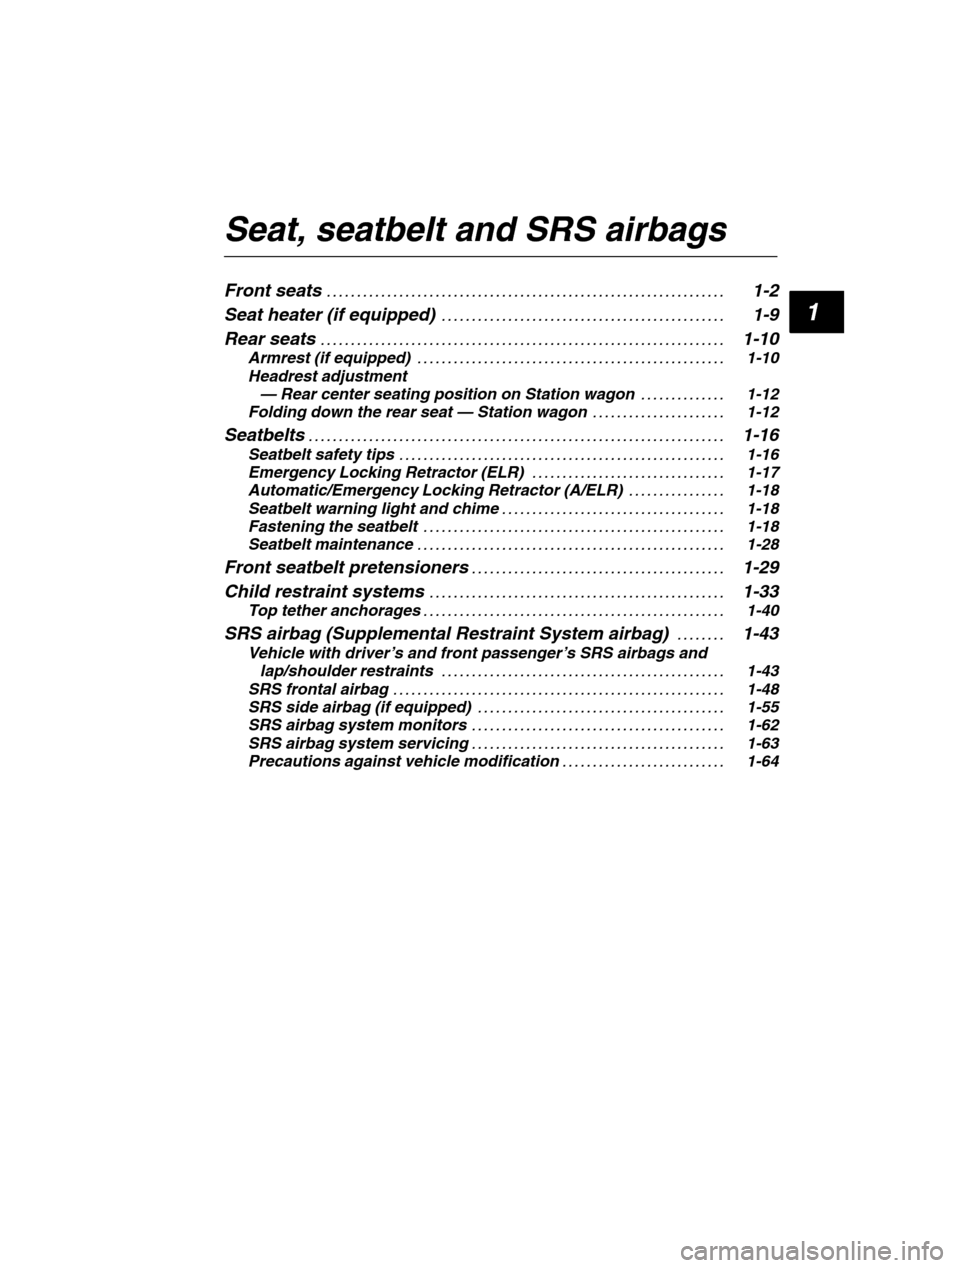 SUBARU LEGACY 2002 3.G User Guide 1
Seat, seatbelt and SRS airbags Front seats1-2
. . . . . . . . . . . . . . . . . . . . . . . . . . . . . . . . . . . . . . . . . . . . . . . . . . . . . . . . . . . . . . . .  . . 
Seat heater (if eq